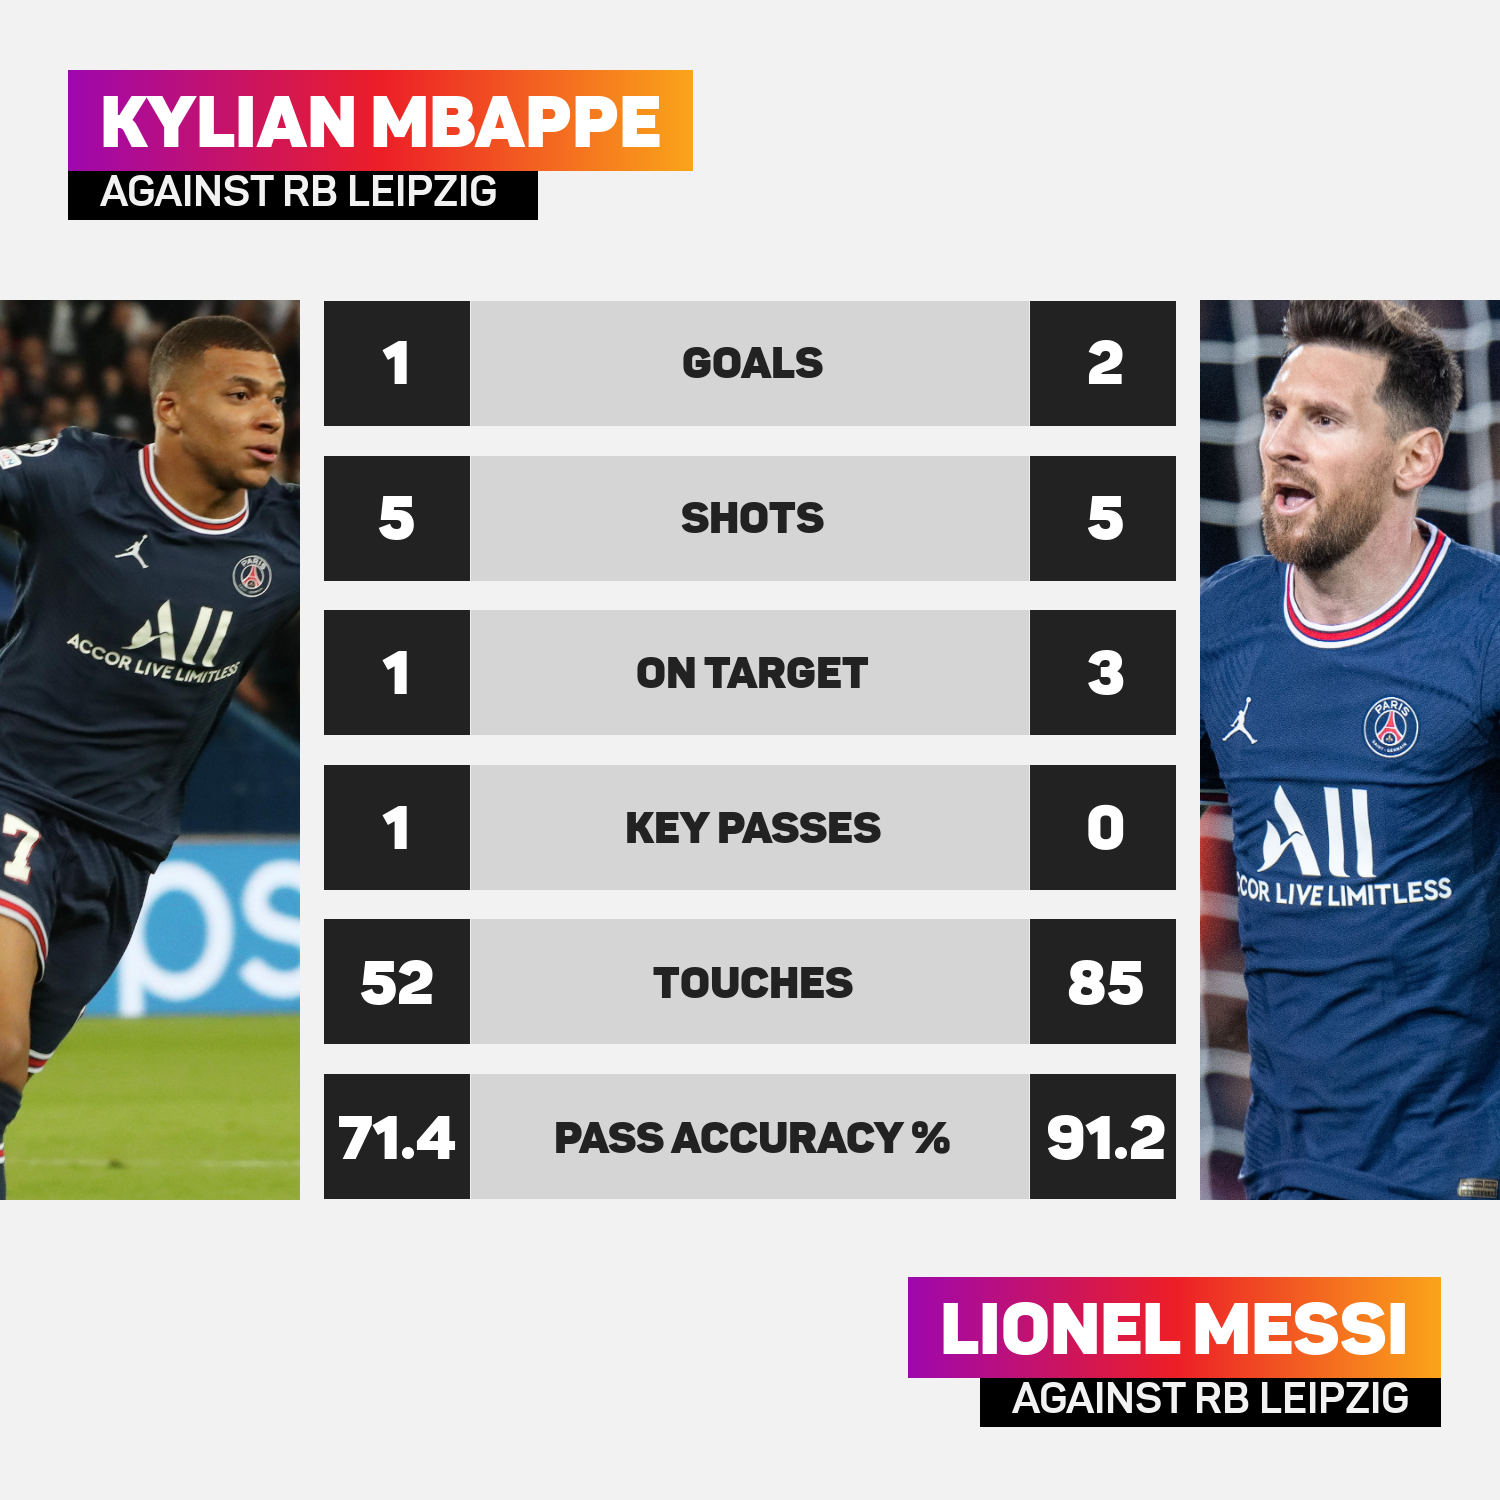 Kylian Mbappe and Lionel Messi's match stats